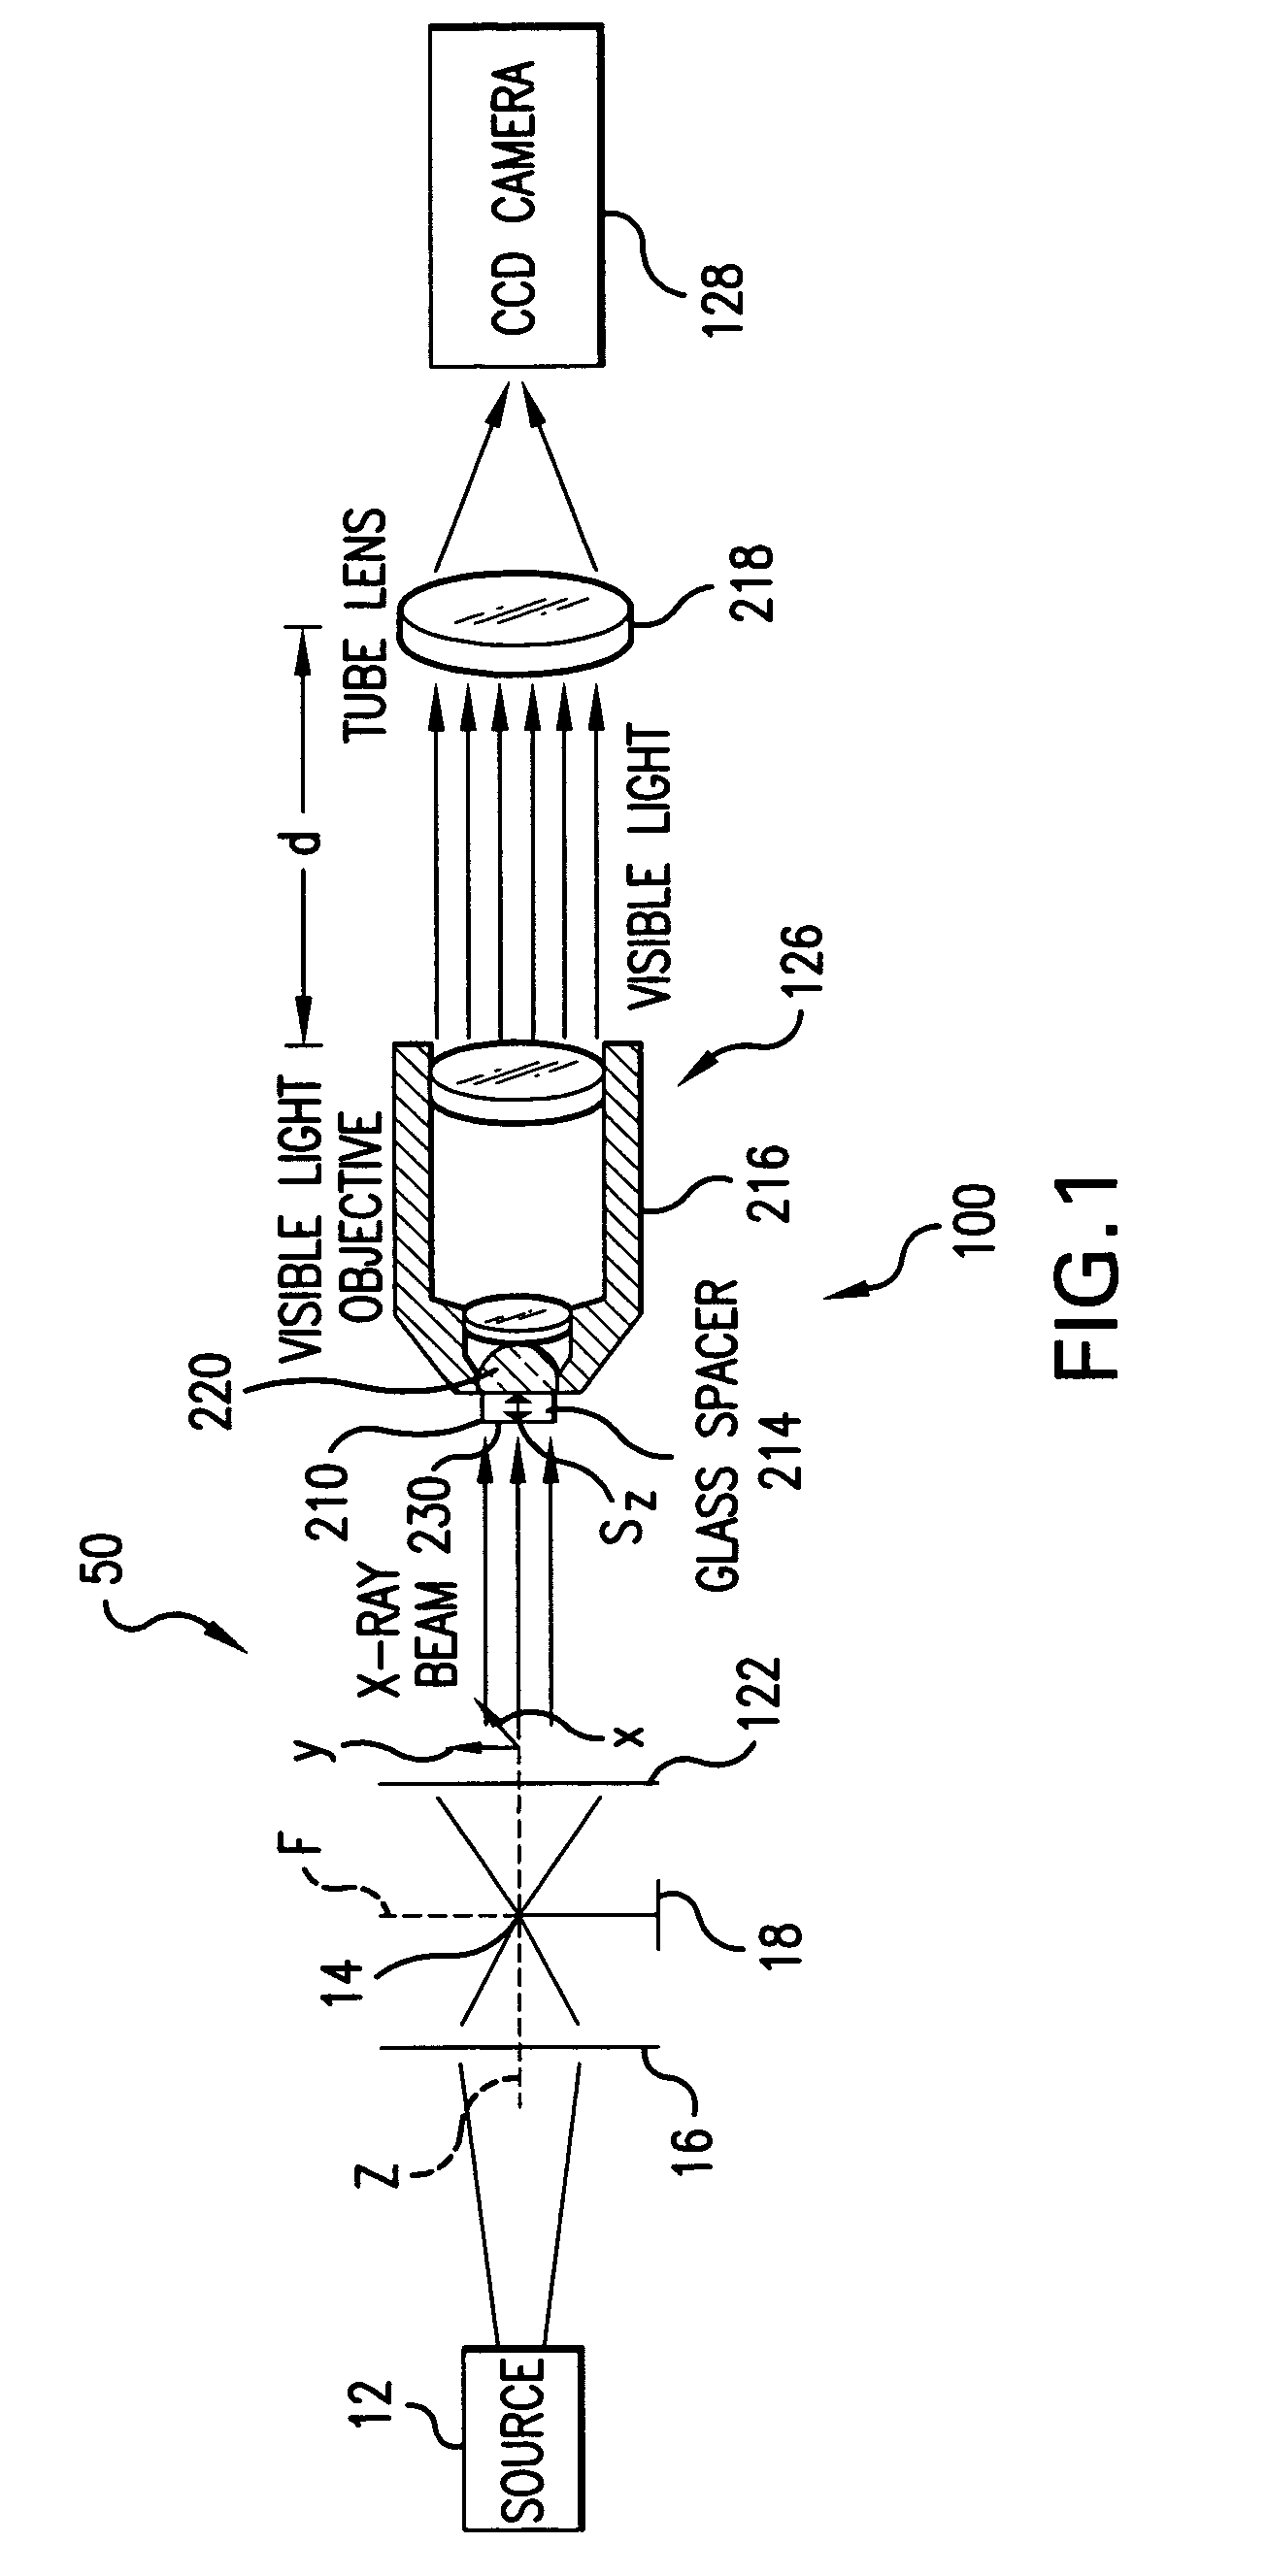 Scintillator optical system and method of manufacture